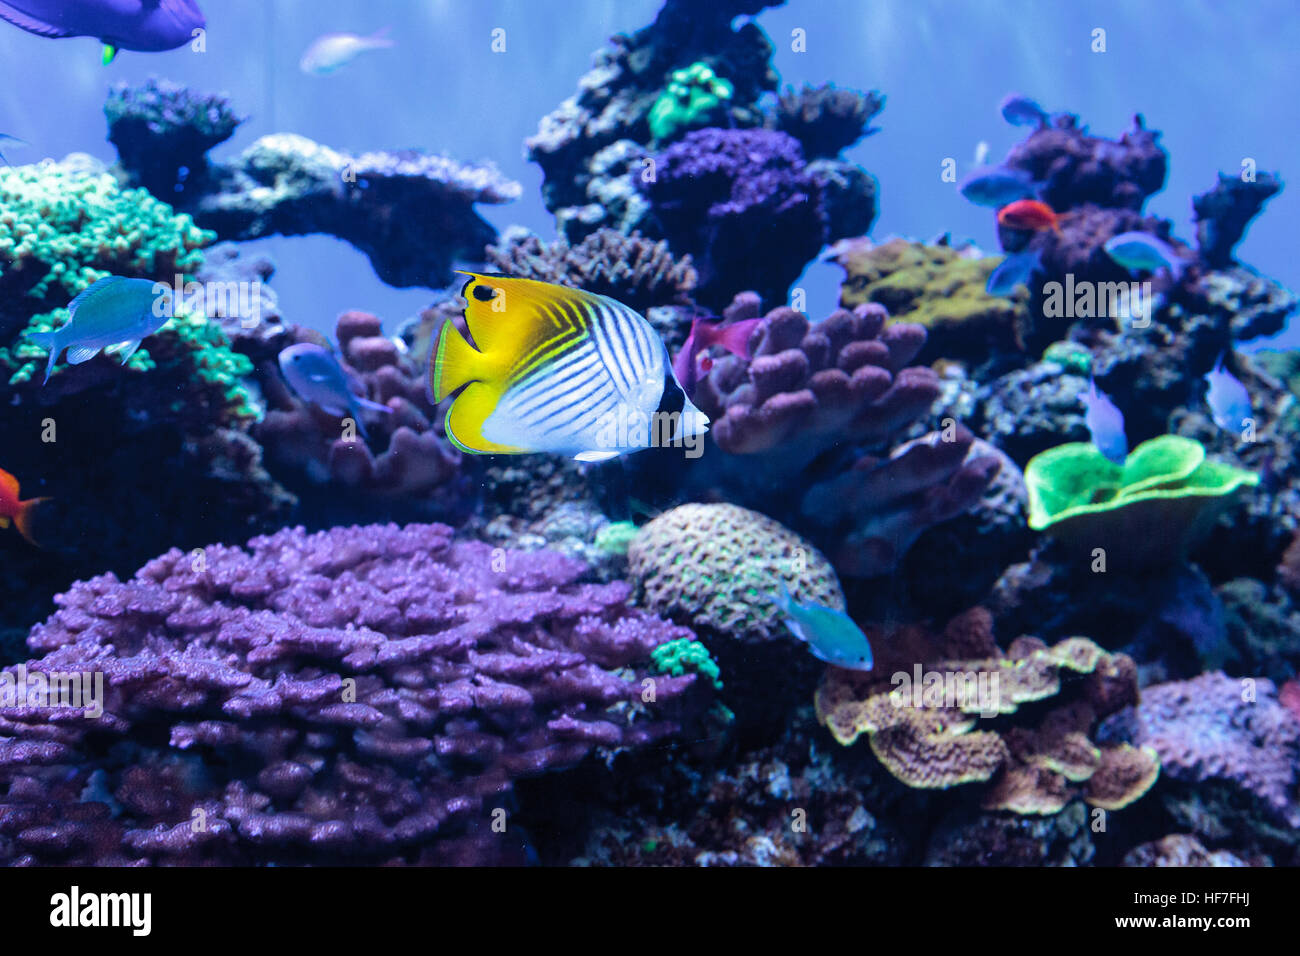 Threadfin butterflyfish known as Chaetodon auriga with a blue green Chromis fish in a coral reef Stock Photo